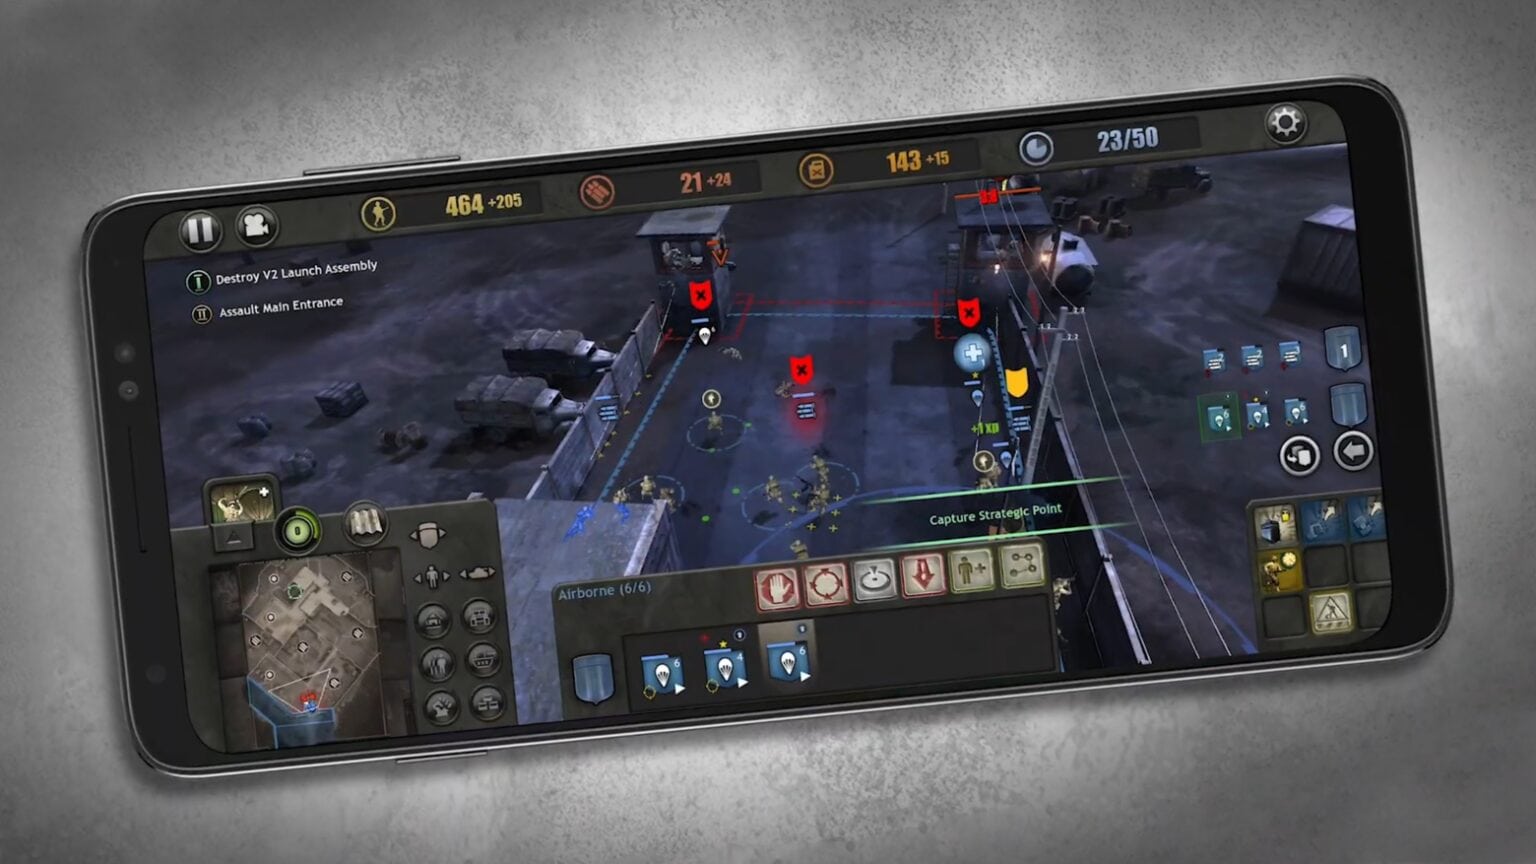 ‘Company of Heroes’ will debut on iPhone on Sept. 10.